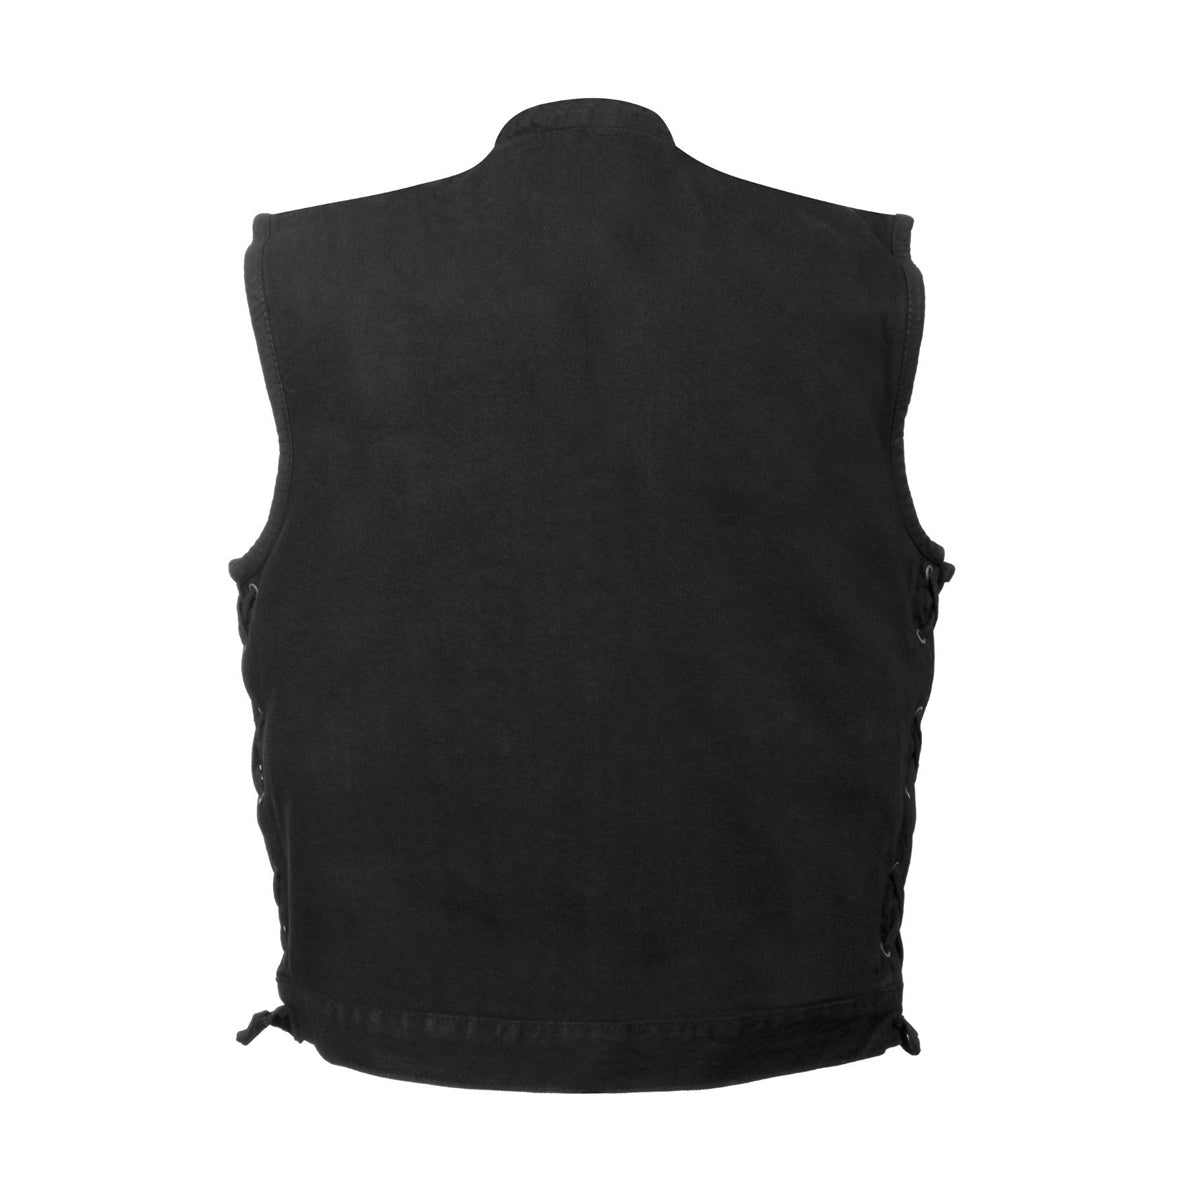 MEN’S MOTORCYCLE RIDING LIGHT WEIGHT BLK DENIM VEST WITH SIDE LACES & ZIPPER